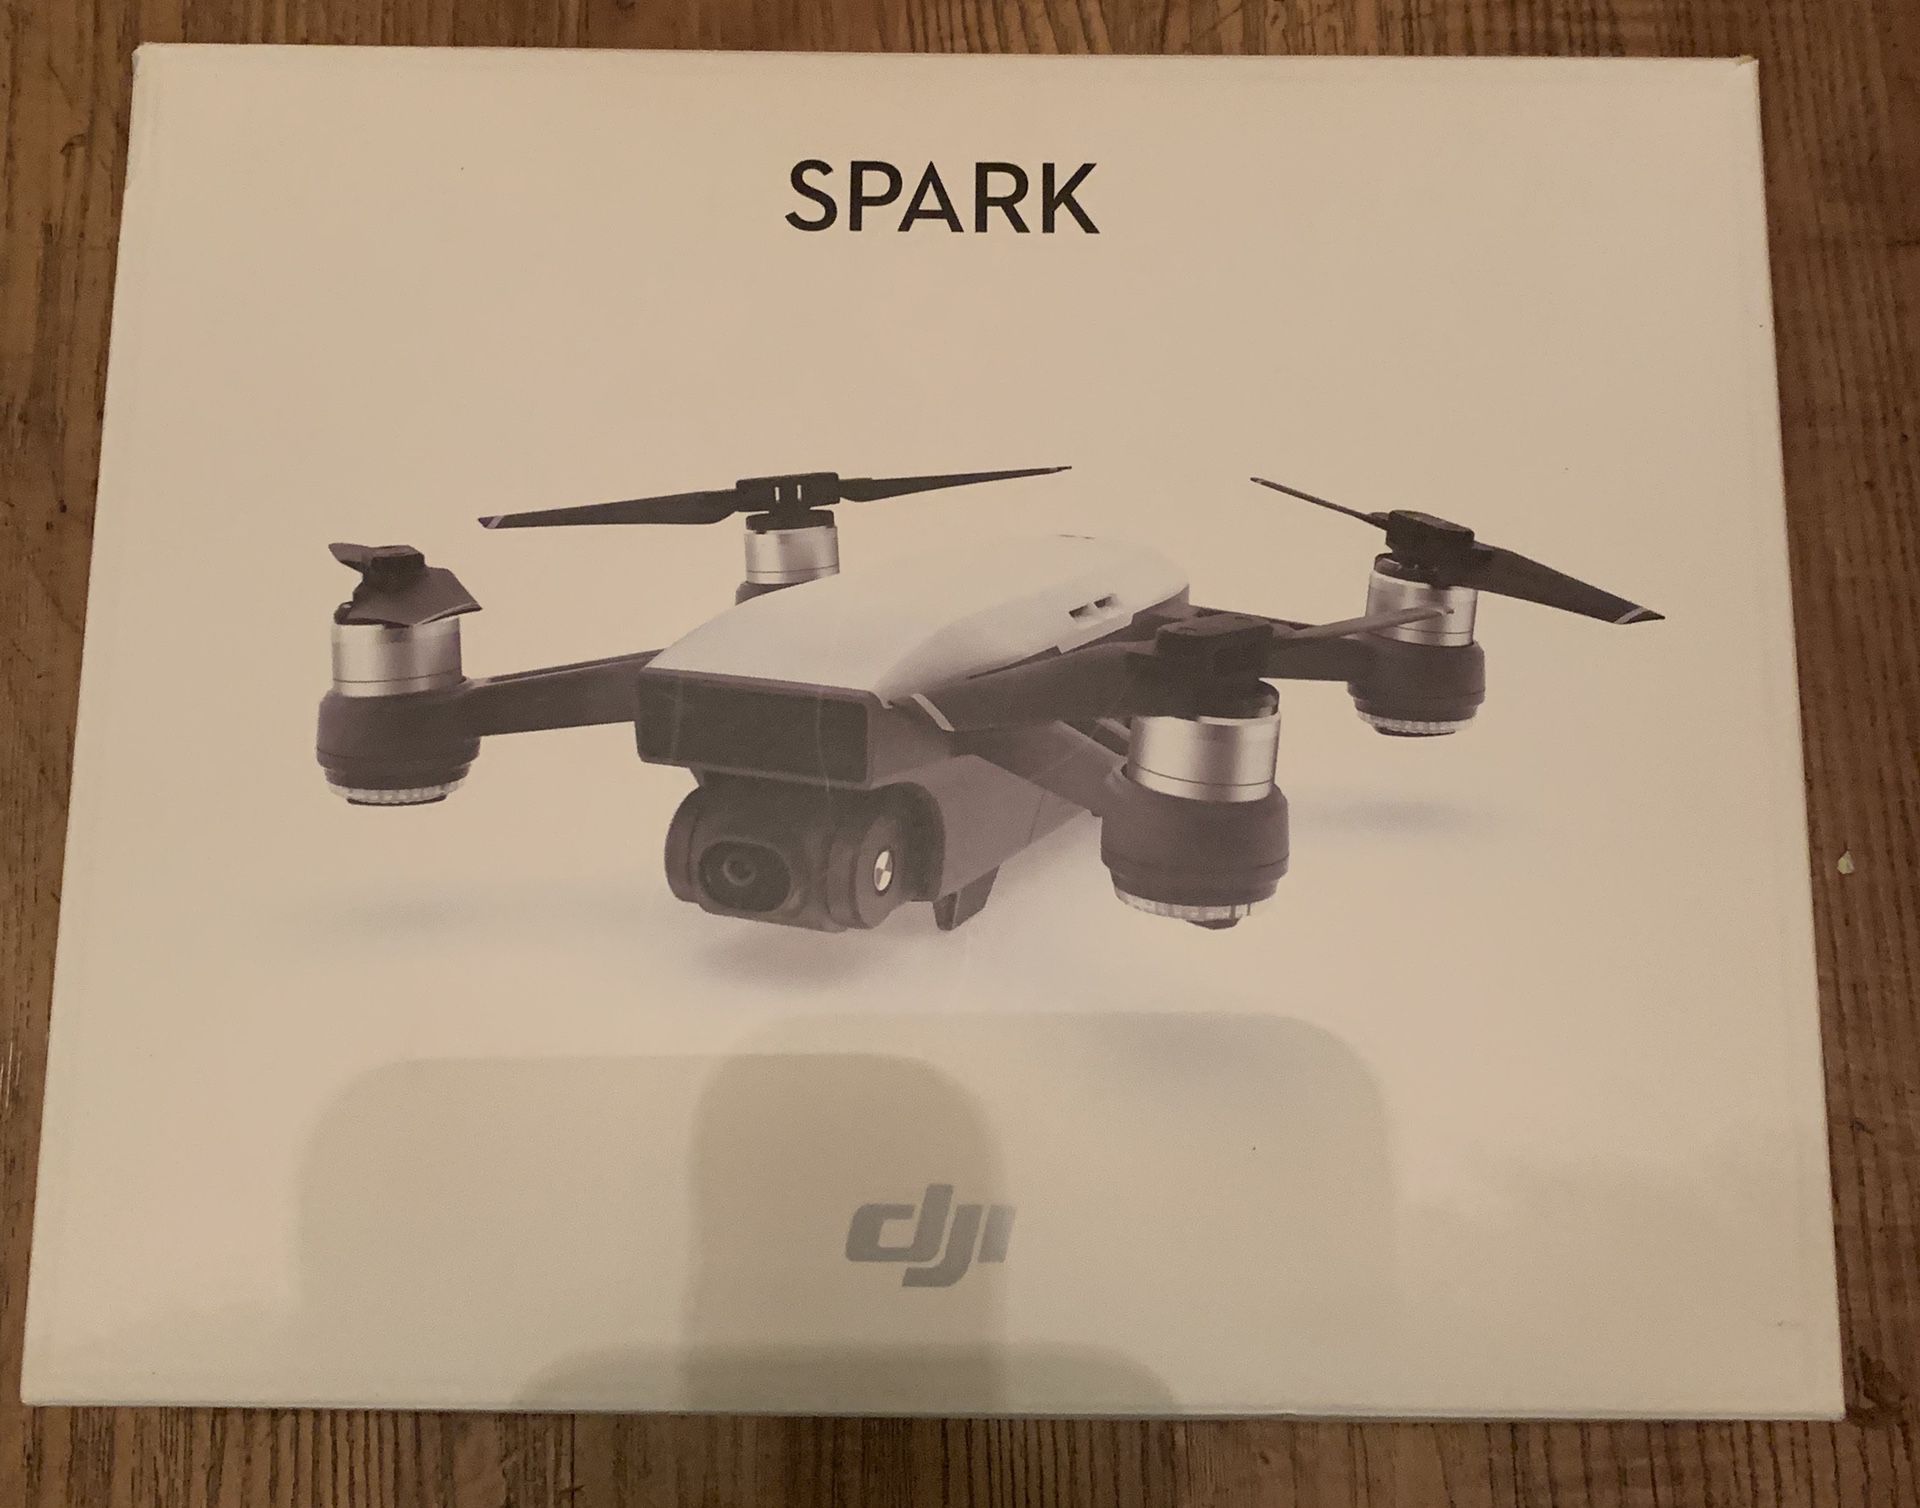 DJI Spark with remote